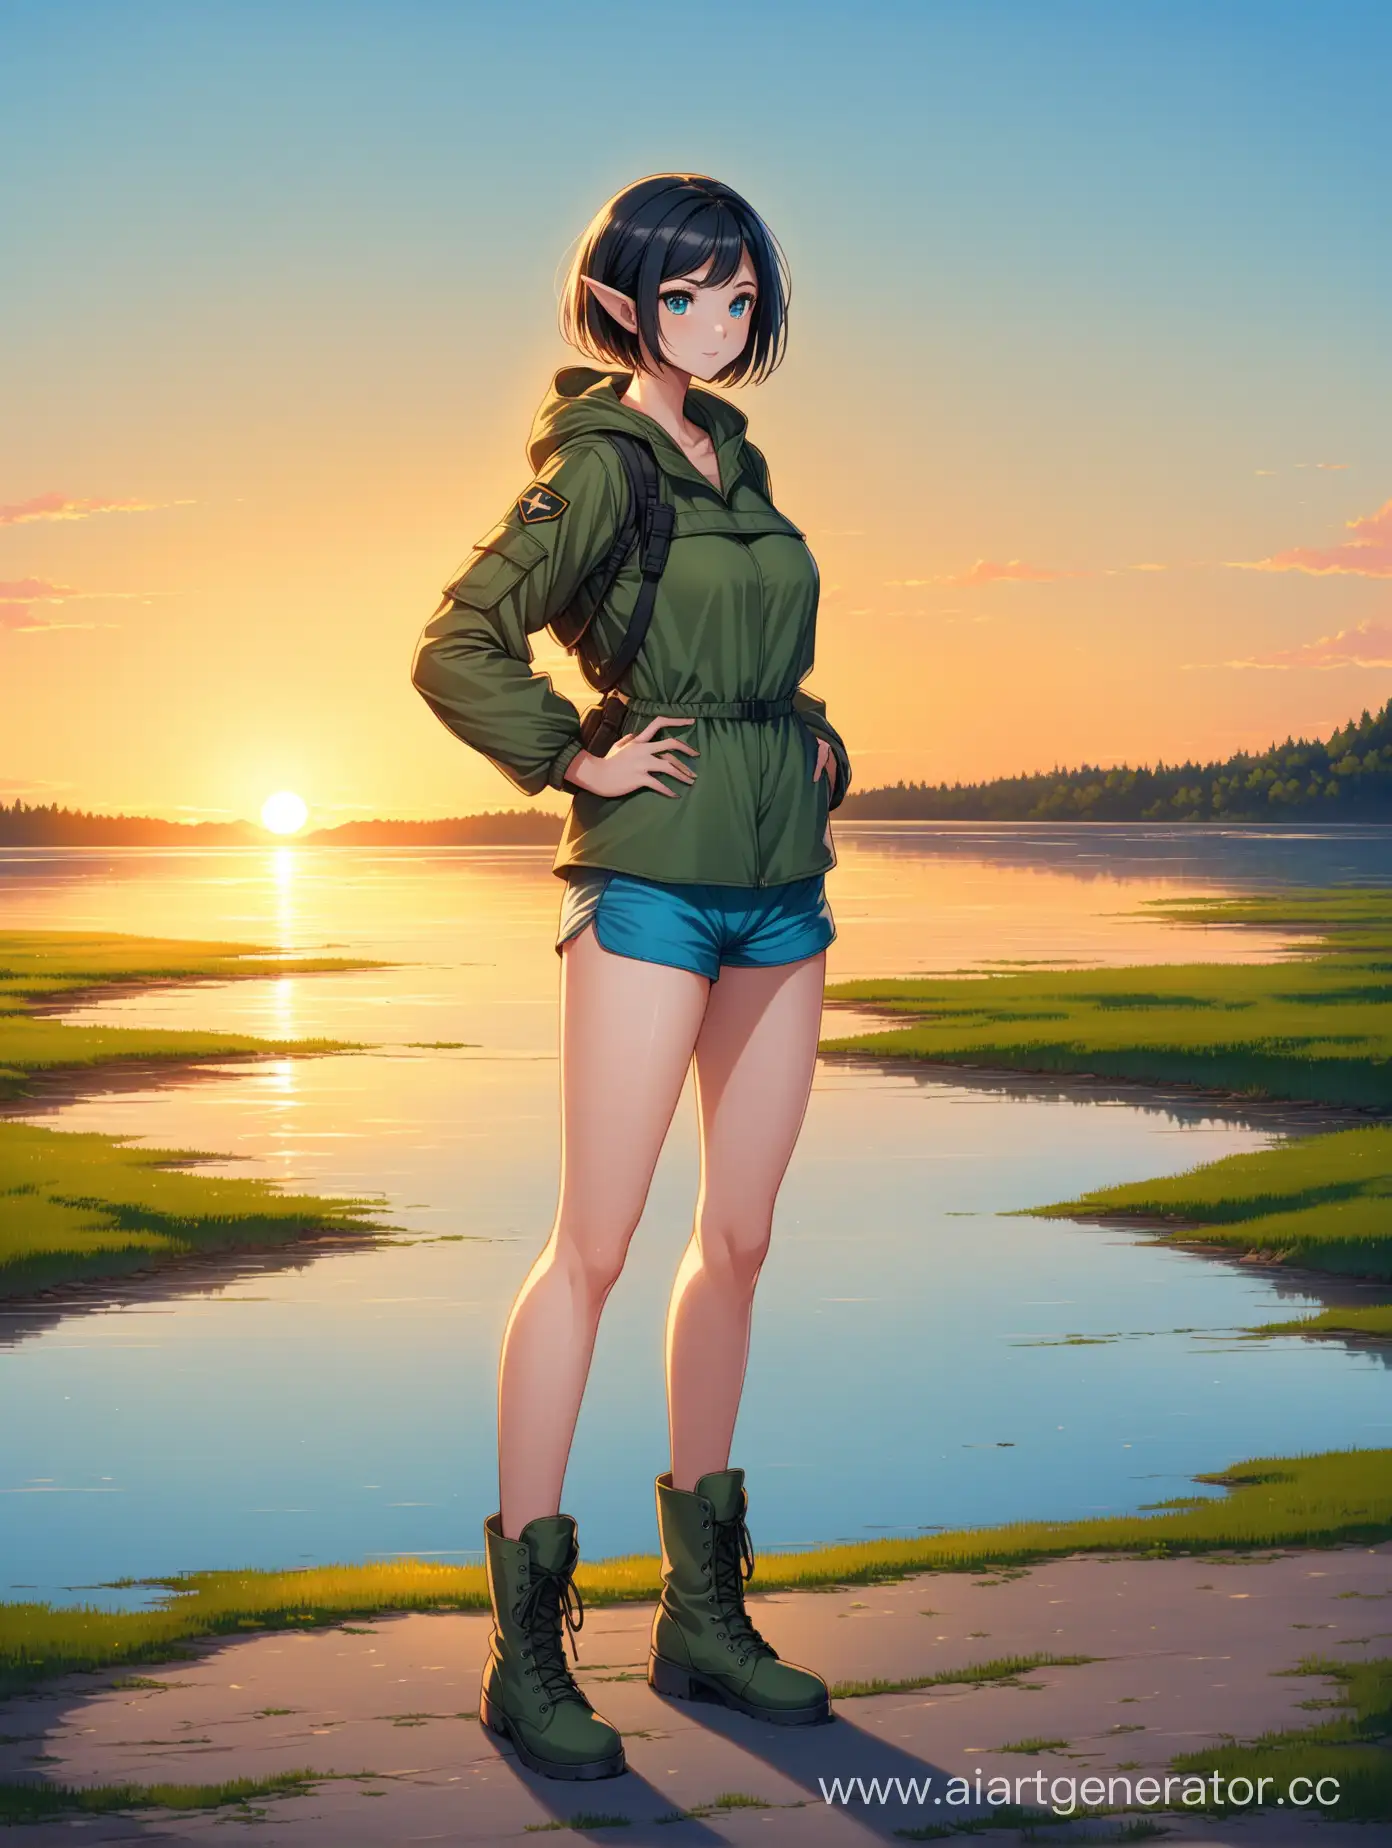 ElfEared-Girl-Standing-at-Abandoned-Lake-Shore-During-Sunset